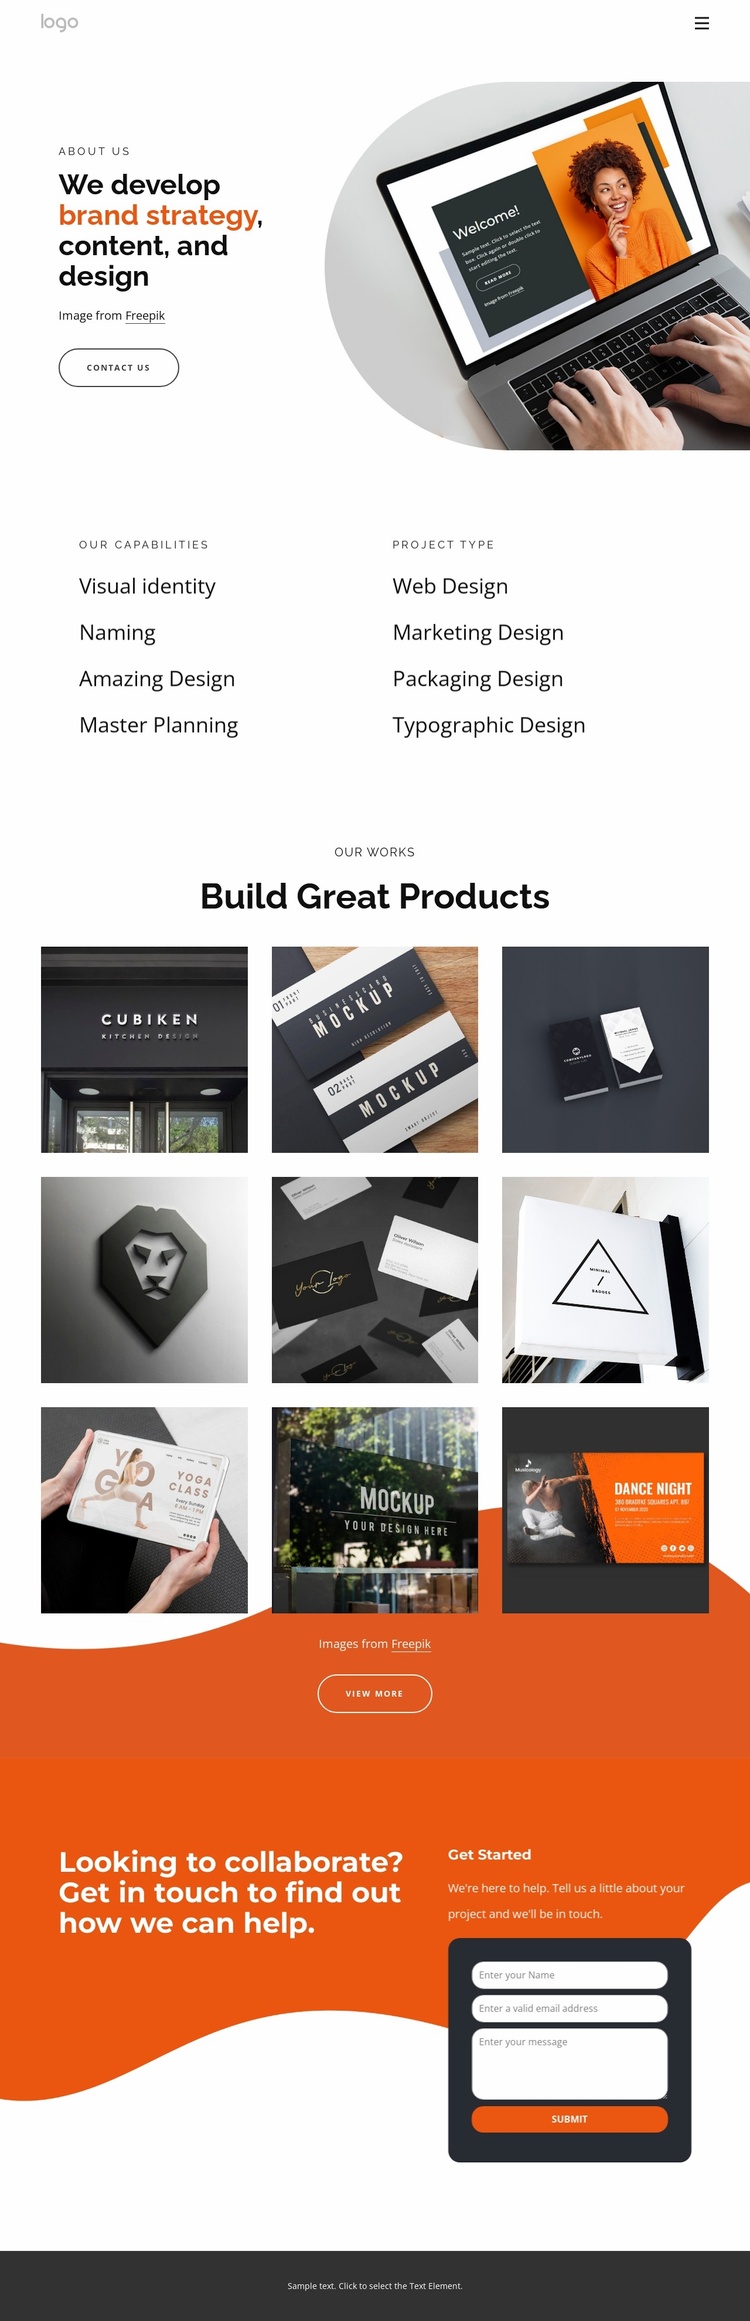 We create thoughtful experiences for humans Website Template